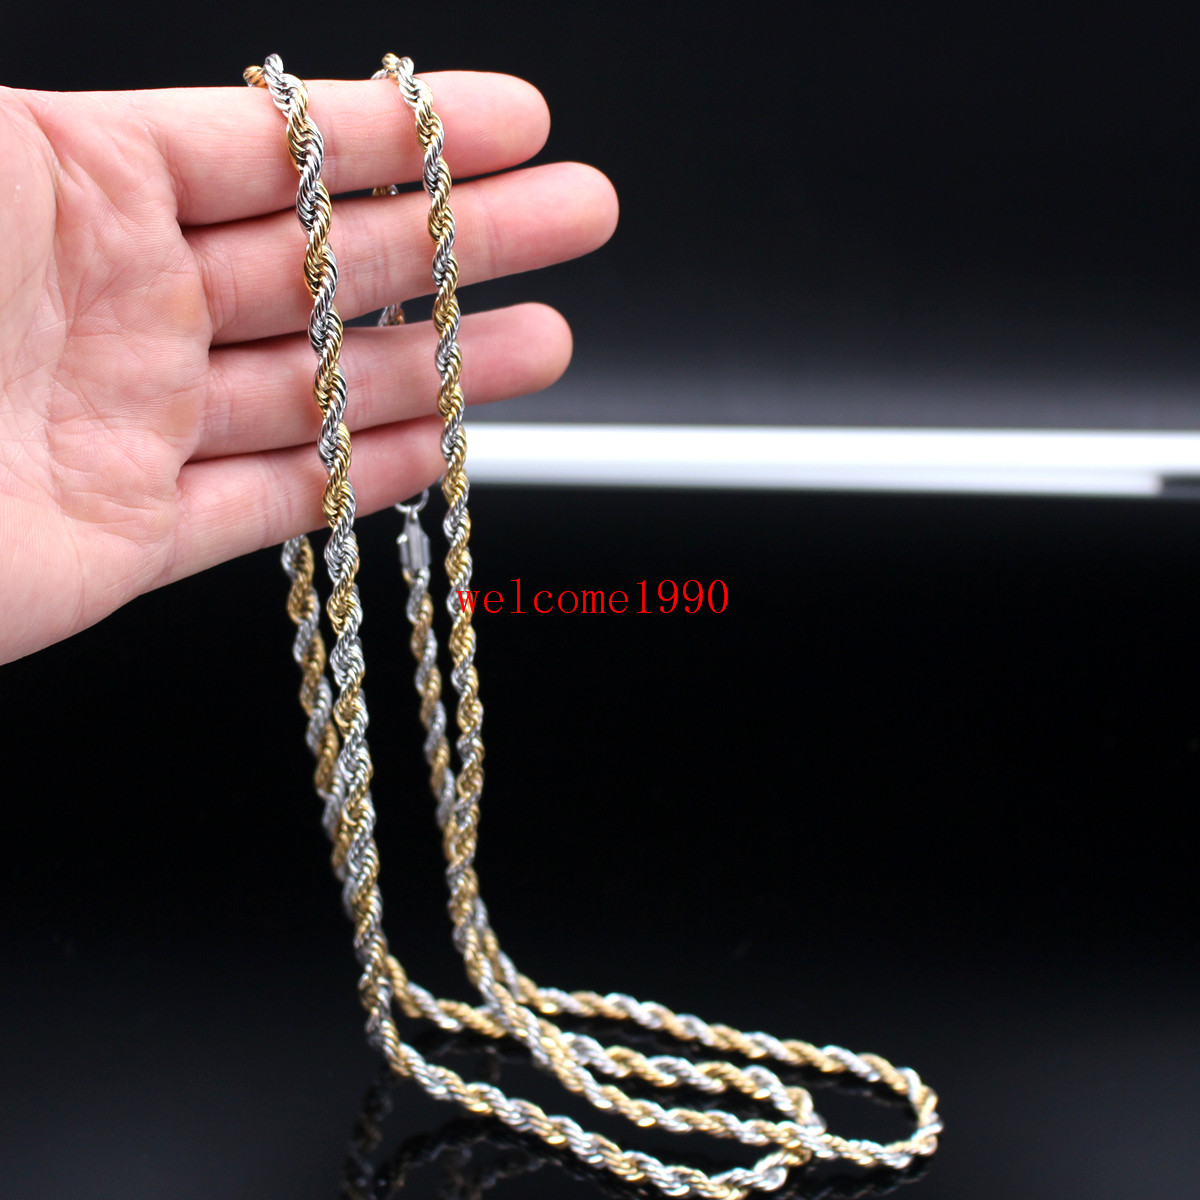 

24 inch 5mm/ 6mm Gold Silver Stainless Steel Twisted singapore chain Rope Chain Link Necklaces Women Men Brand New